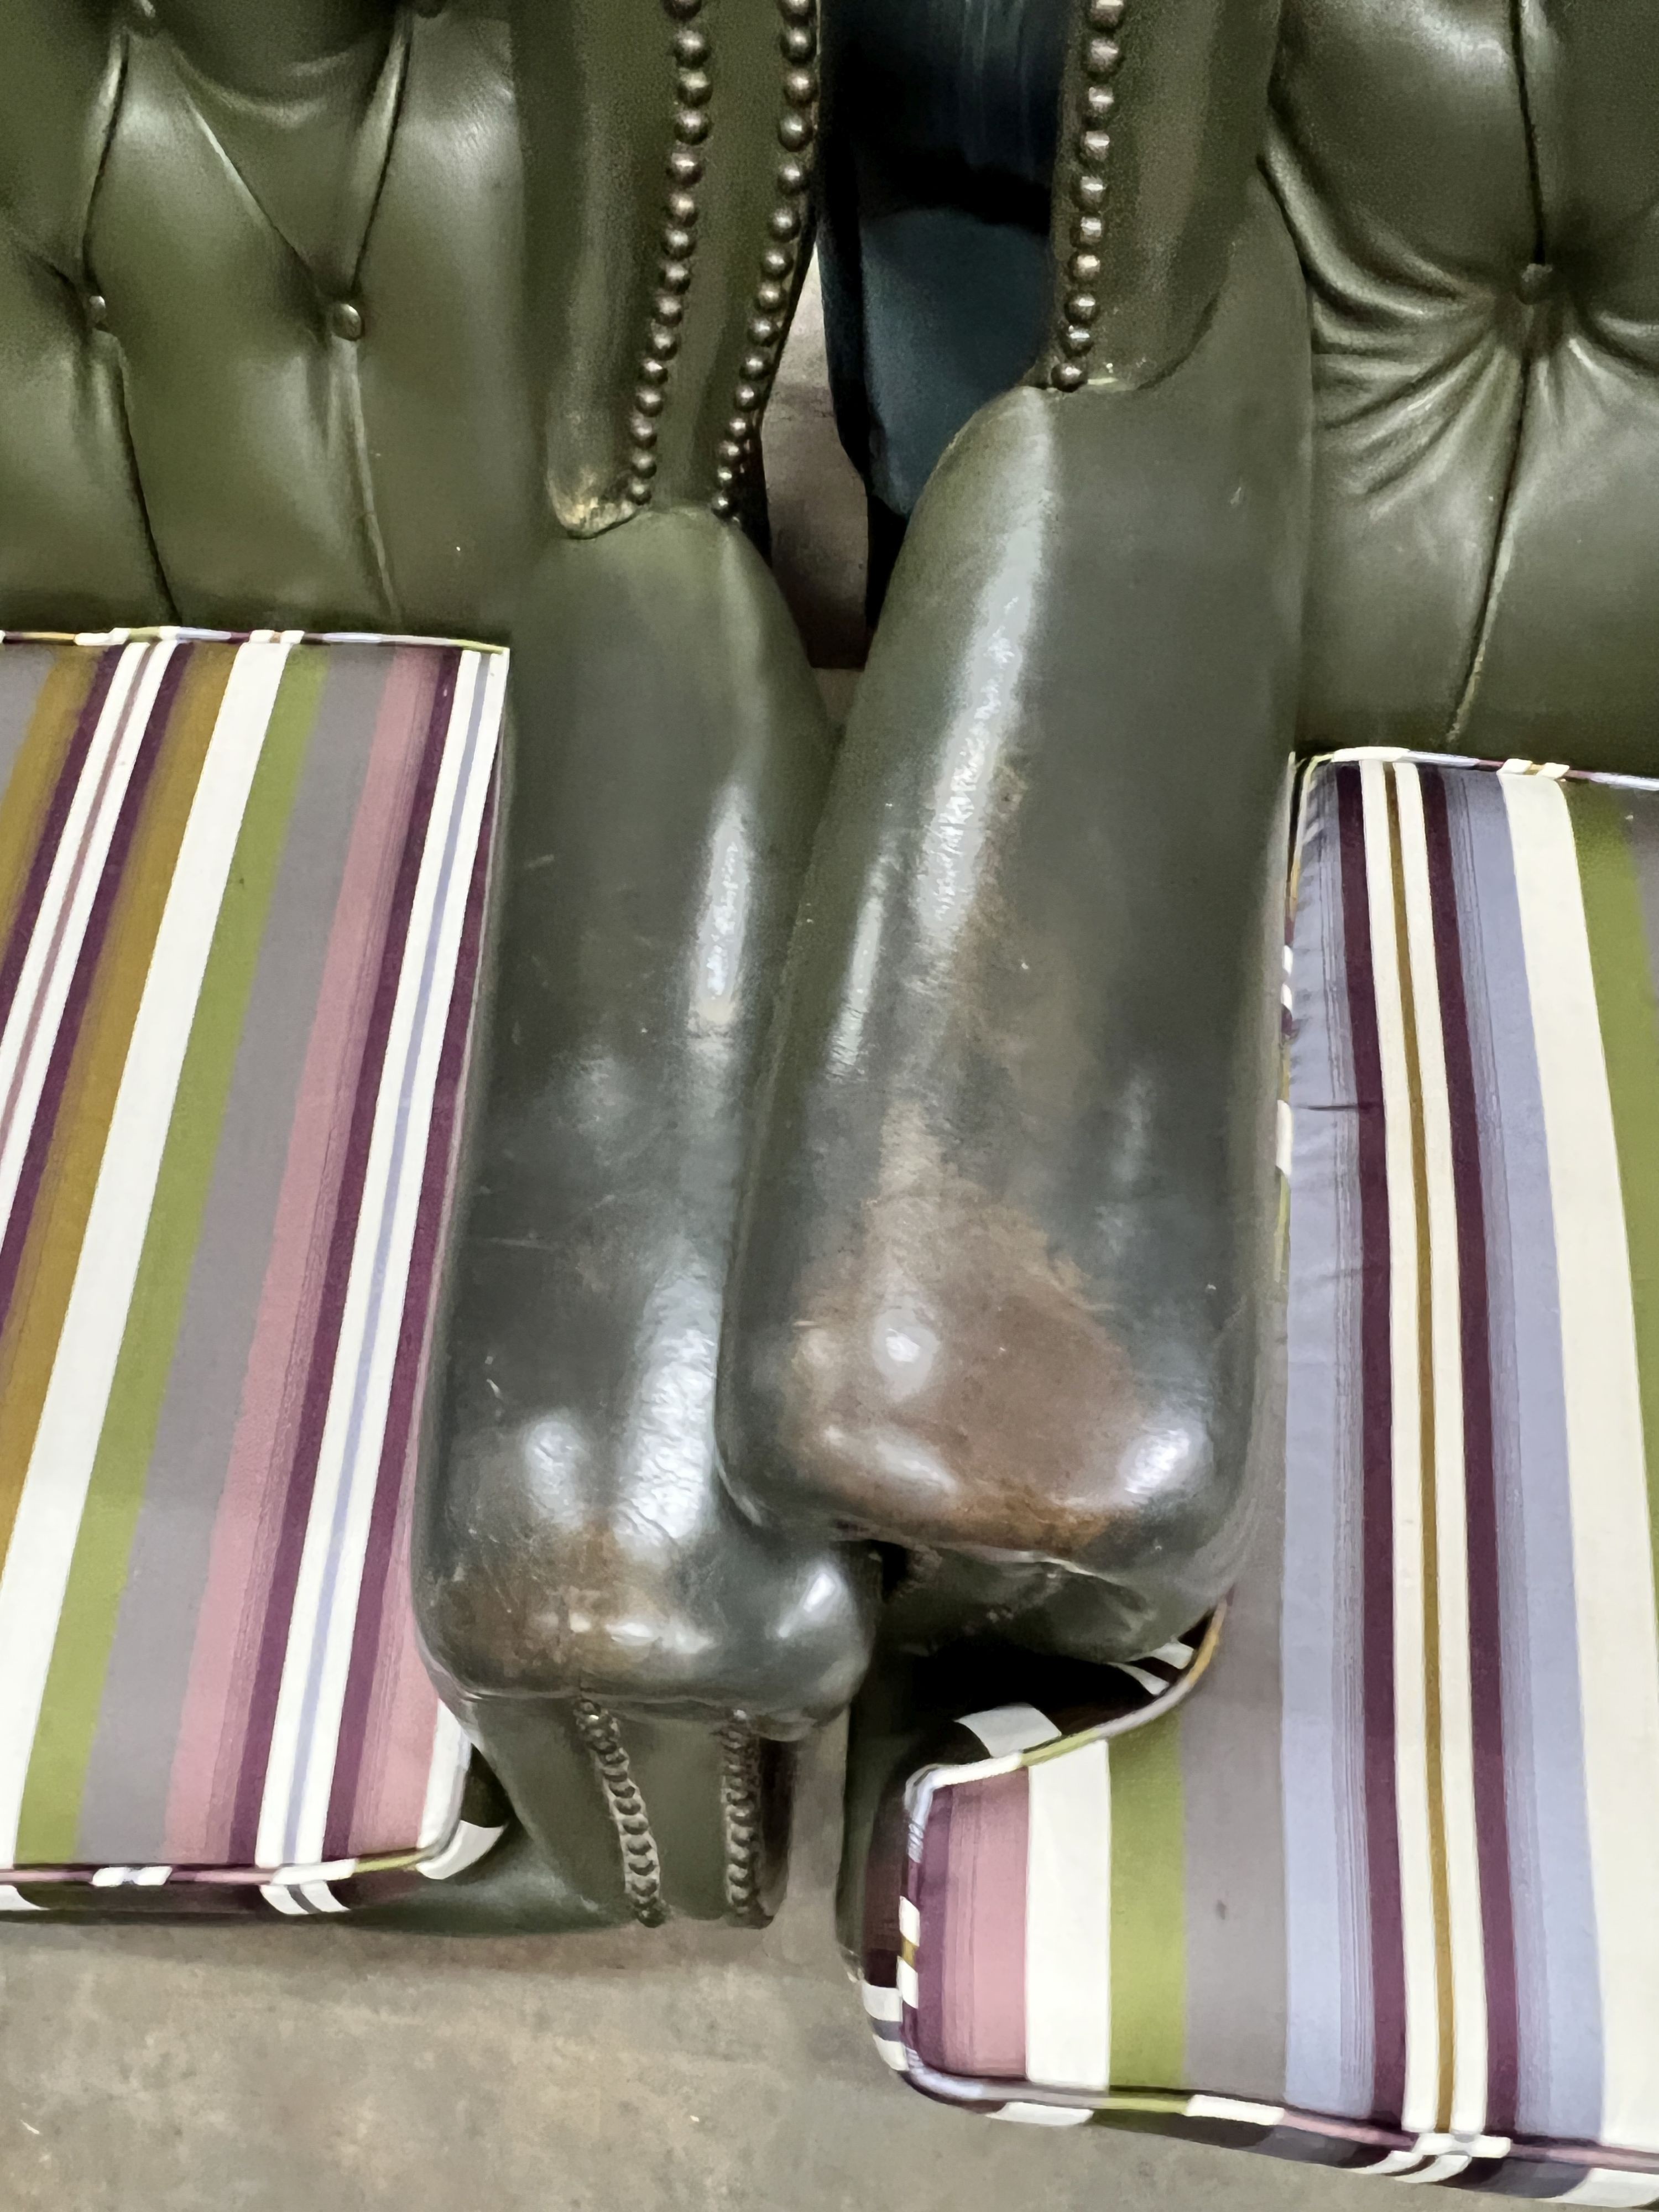 Two Victorian style buttoned green leather wing armchairs